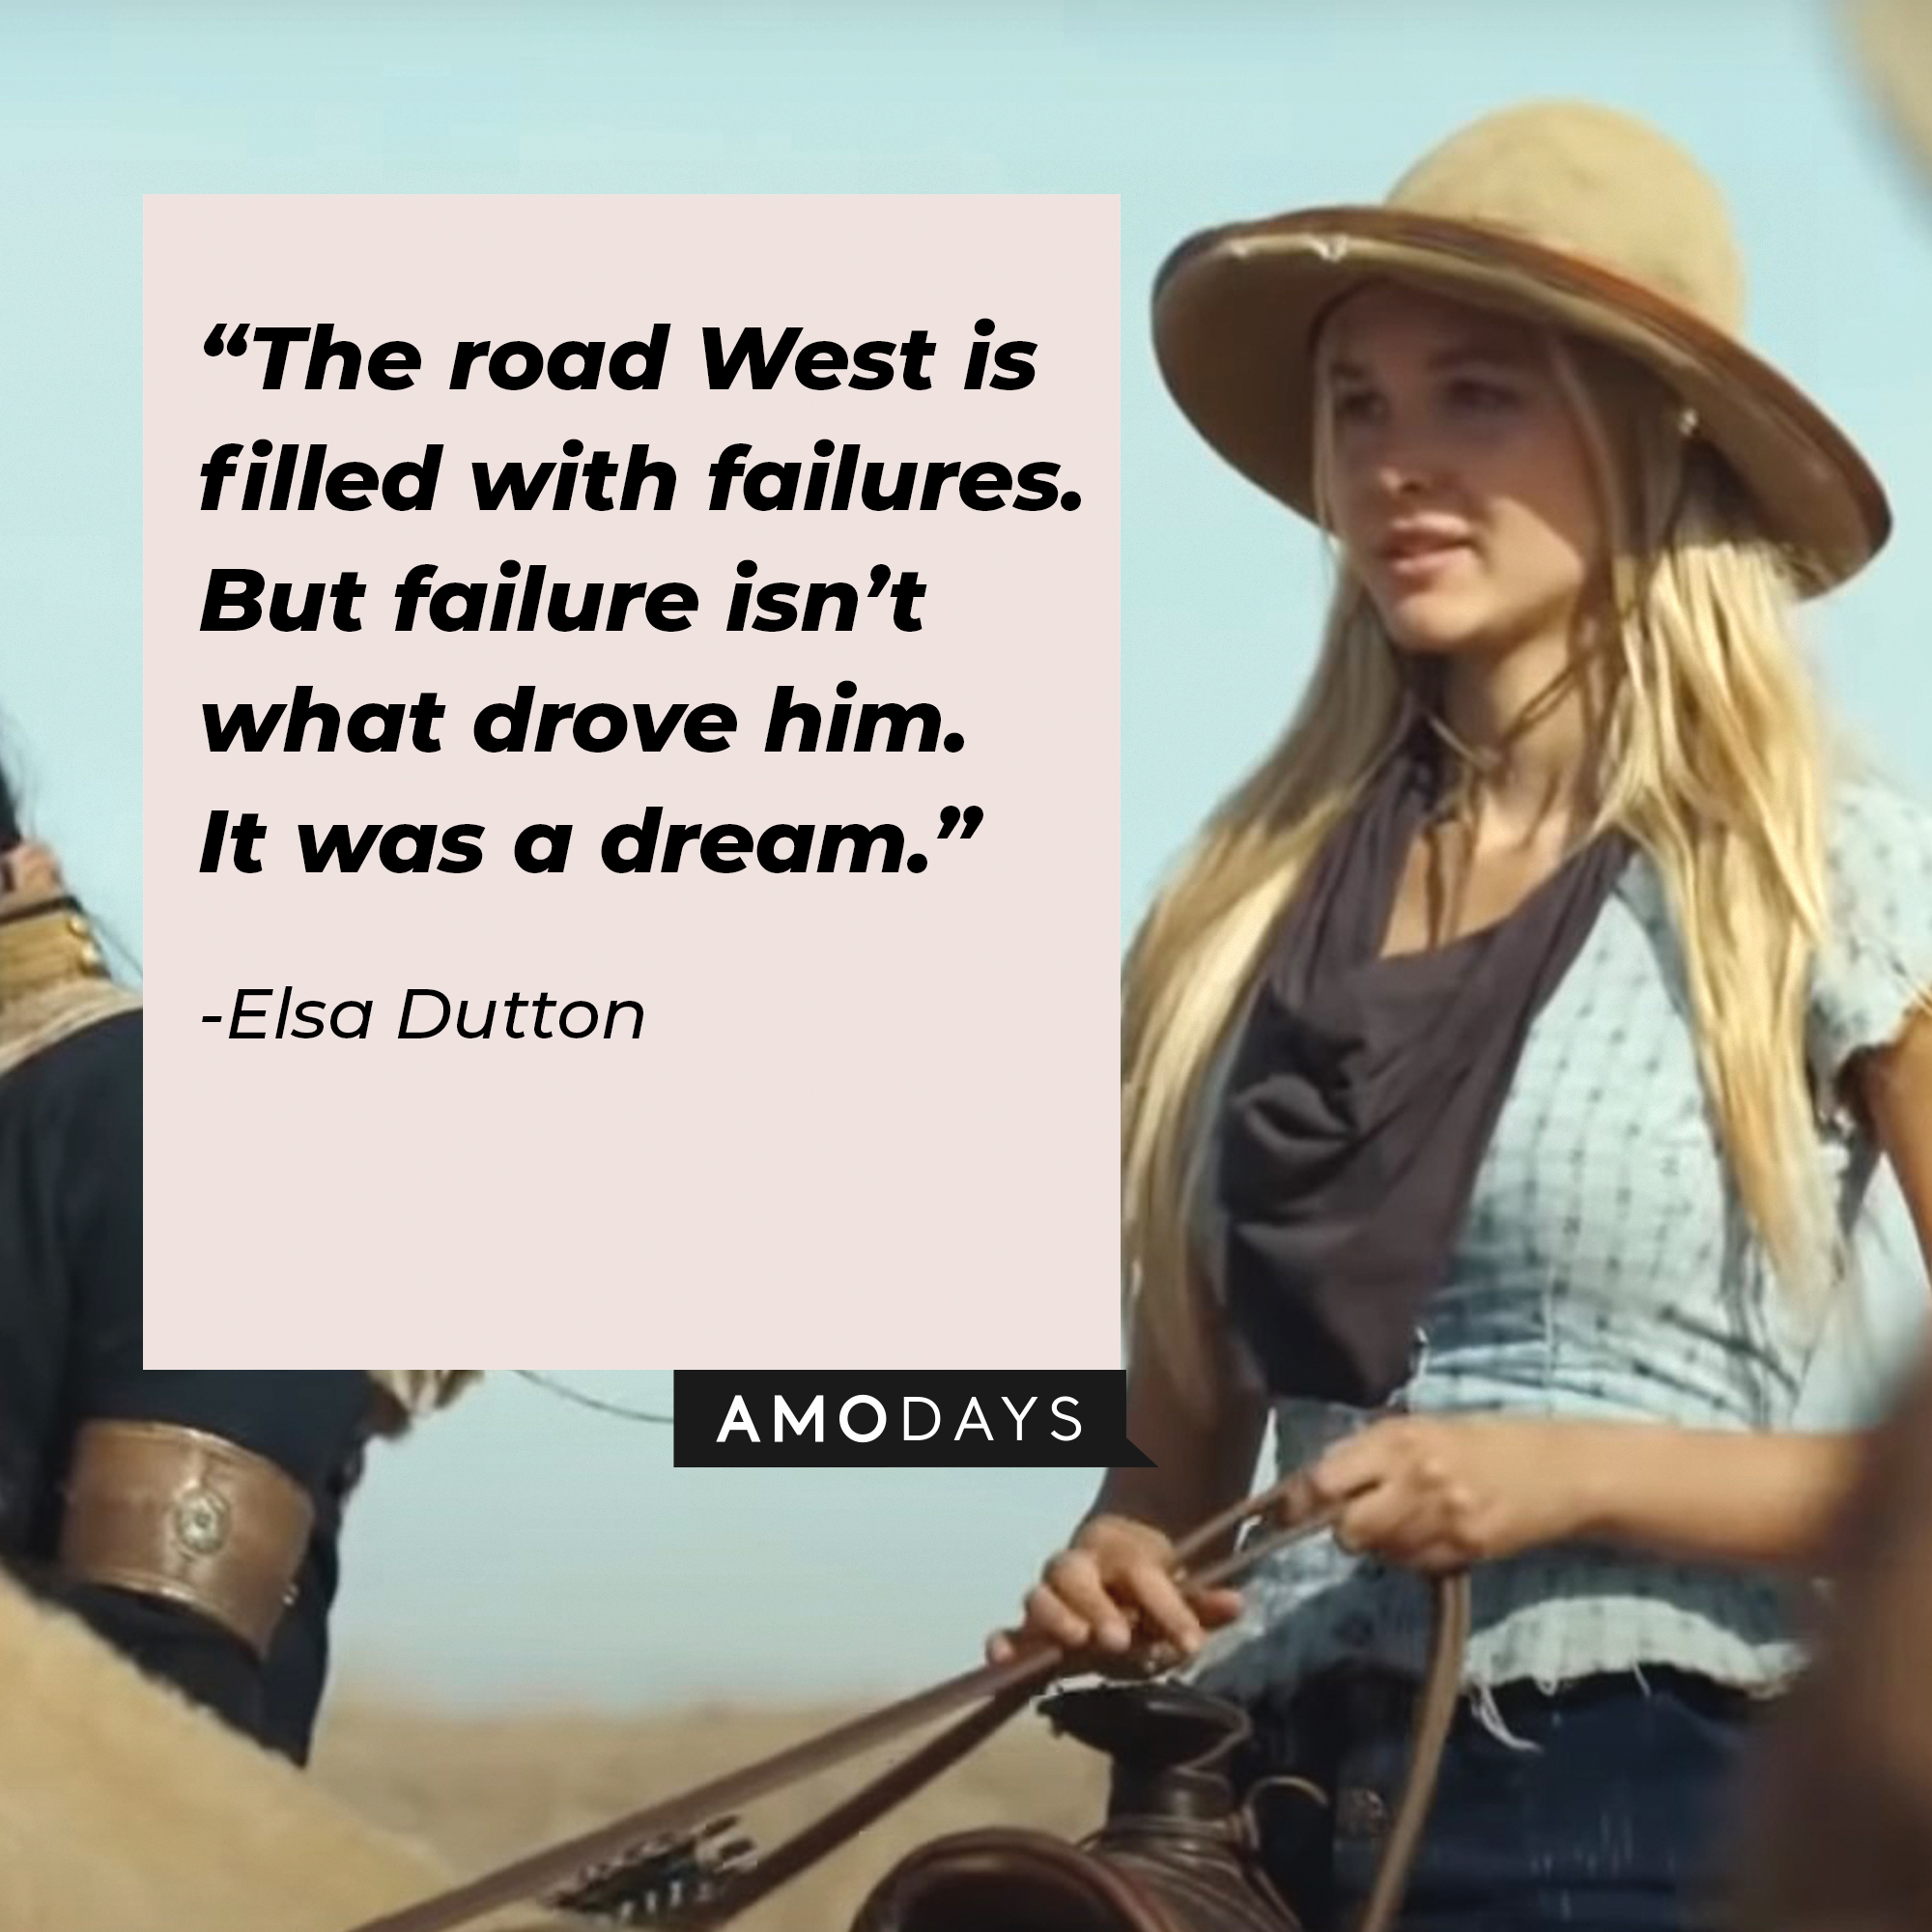 An image of Elsa Dutton with her quote:“The road West is filled with failures. But failure isn’t what drove him. It was a dream.”┃Source: youtube.com/yellowstone